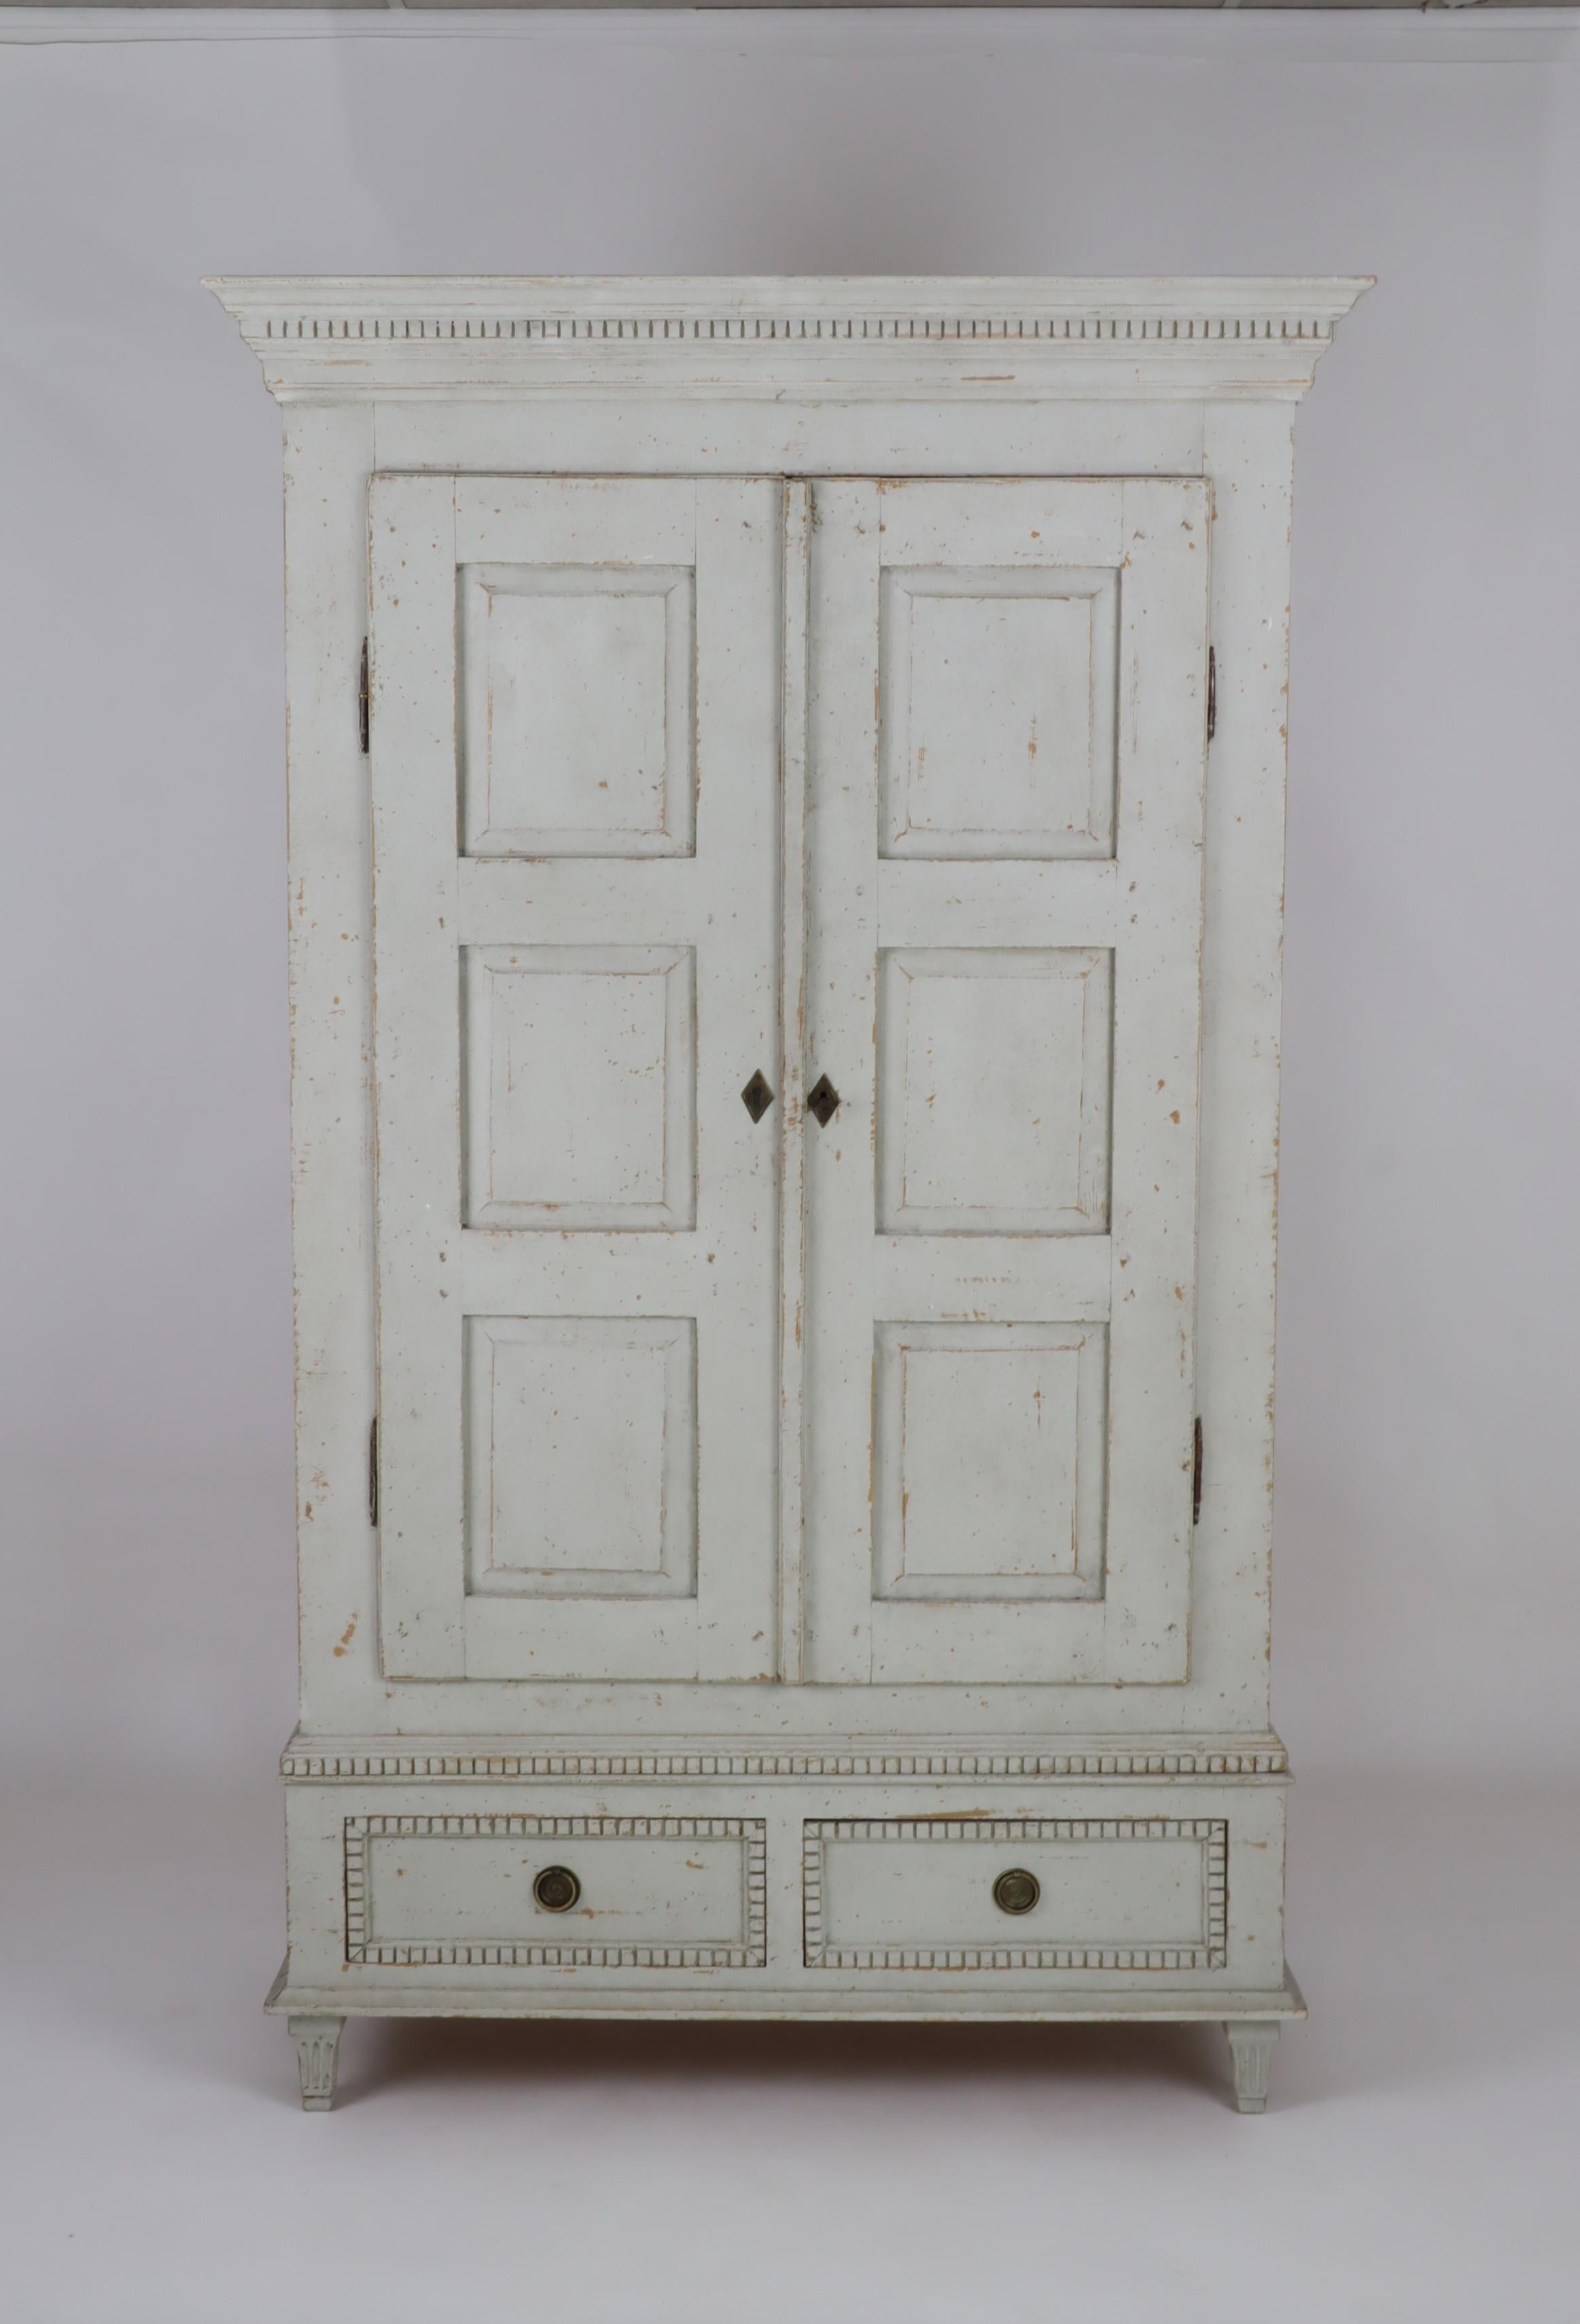 A Swedish Gustavian style painted wood wardrobe from circa 1850 with two doors and two lower drawers. This Swedish Gustavian style painted wardrobe, crafted circa 1850, manifests the grace of historical craftsmanship. The serene hue of the light